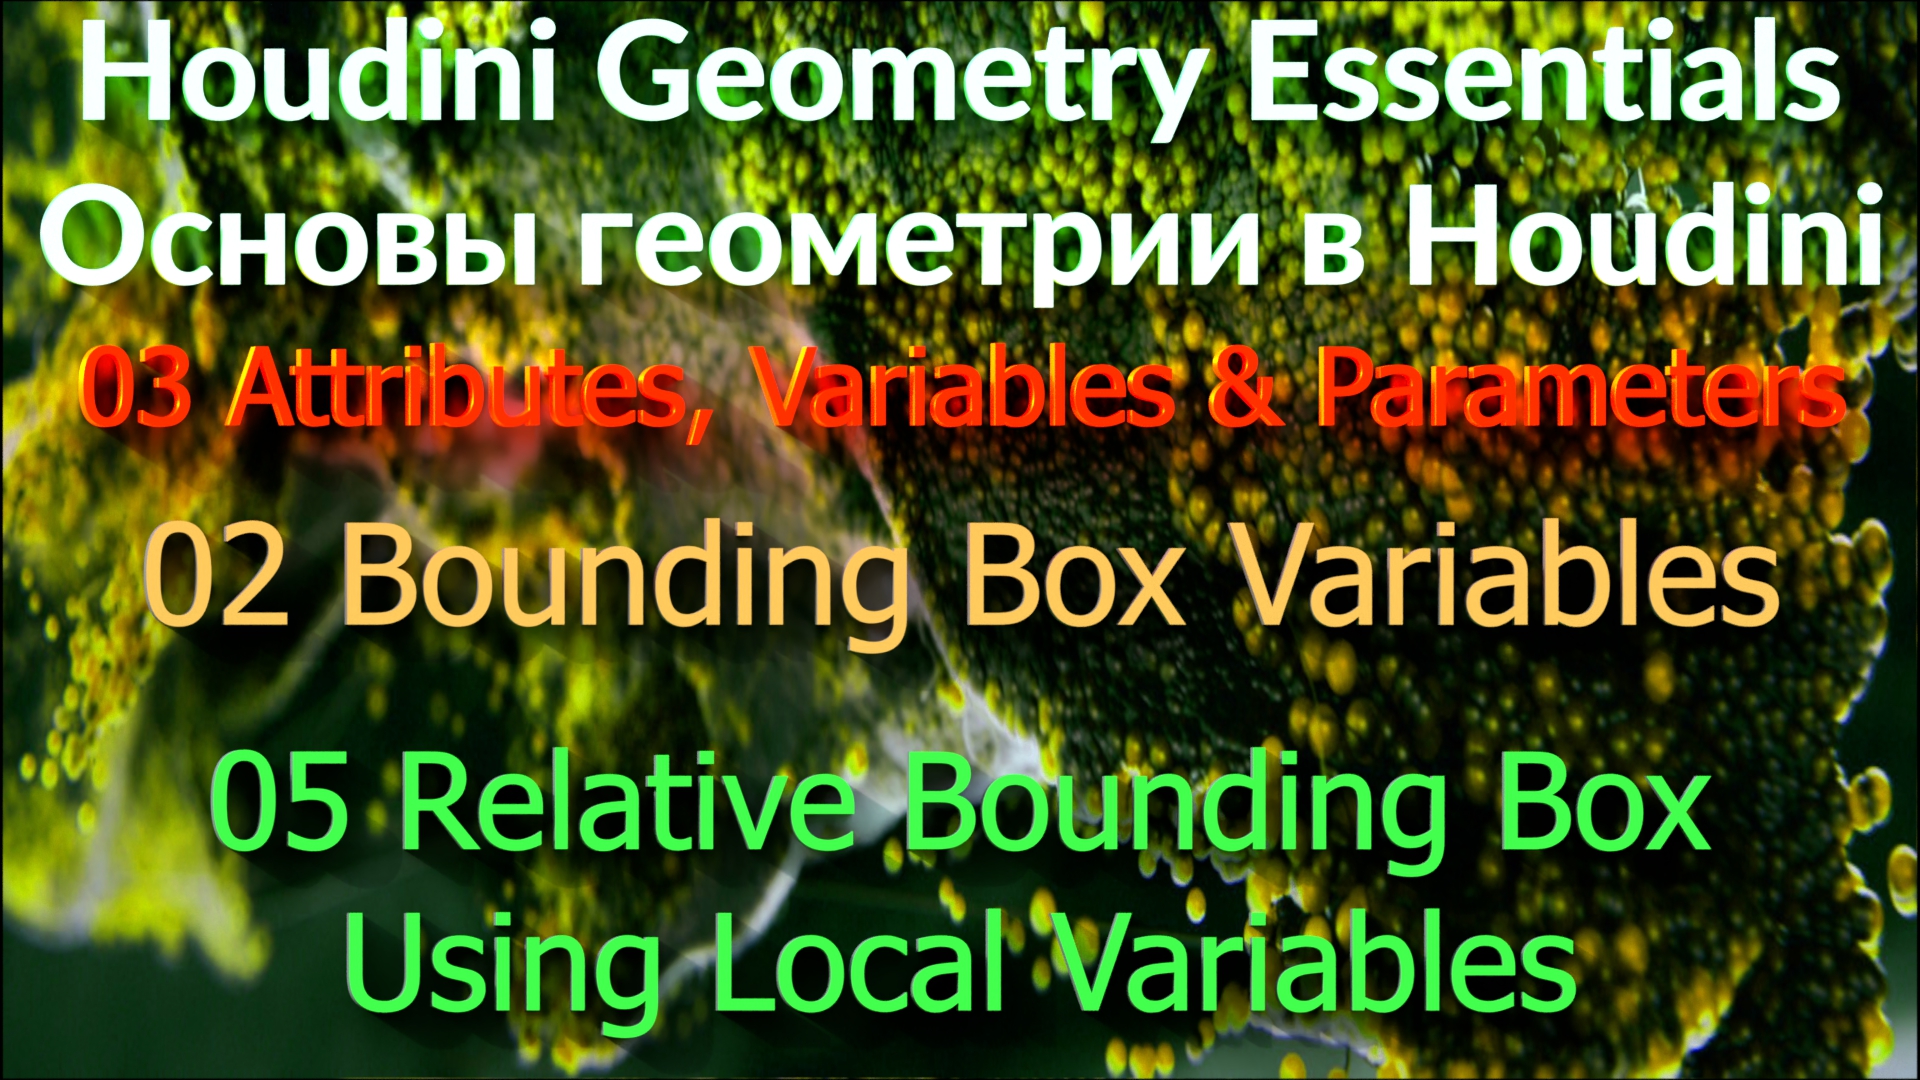 03_02_05 Relative Bounding Box Using Local Variables